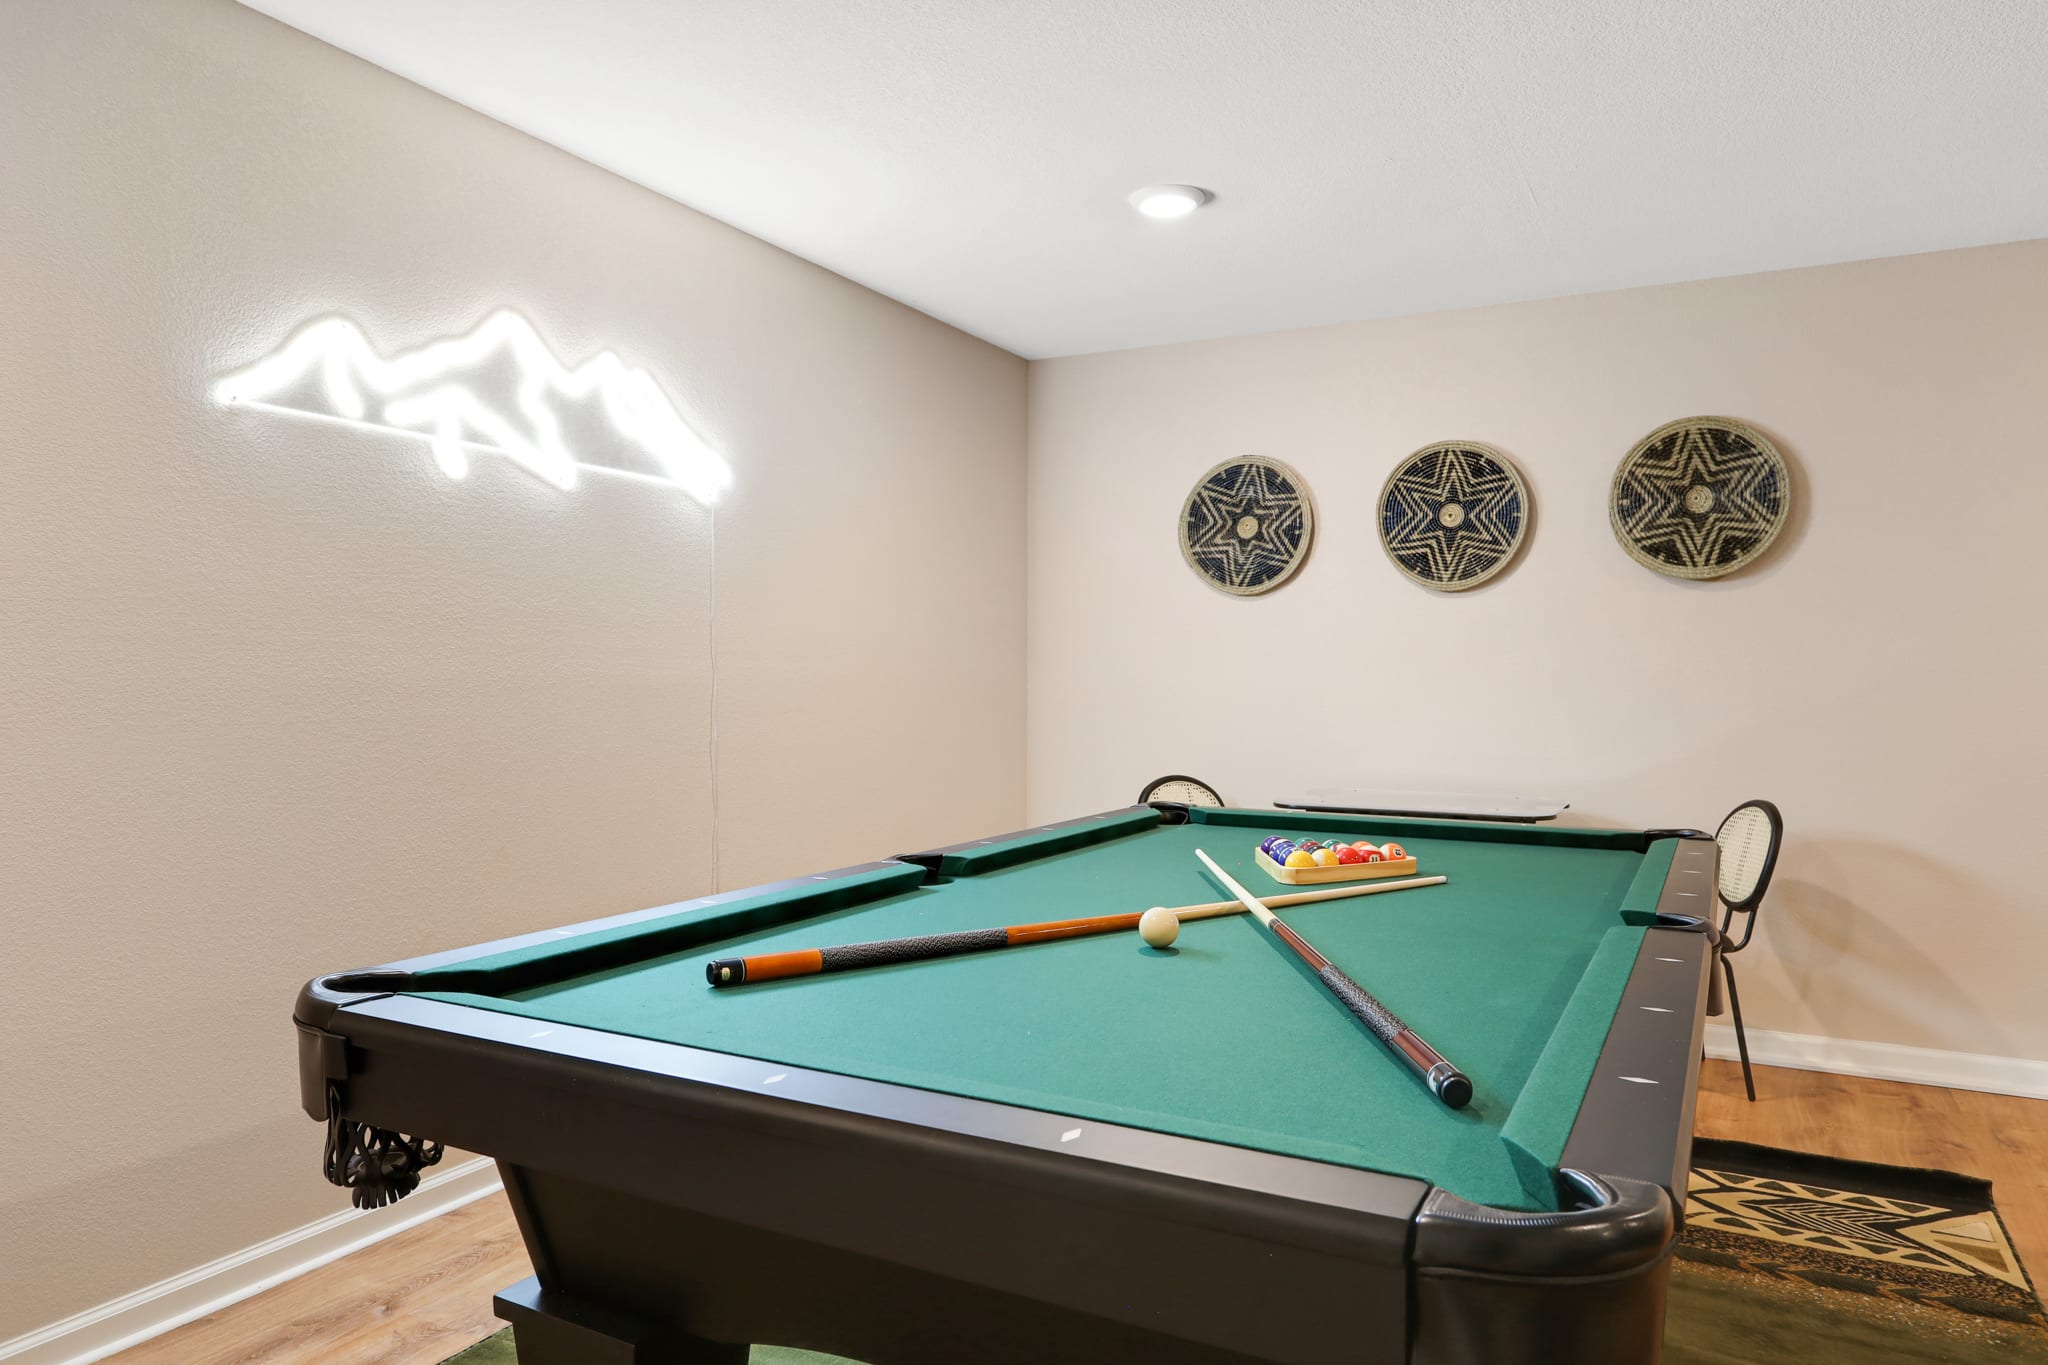 Brand new pool table in the game room!